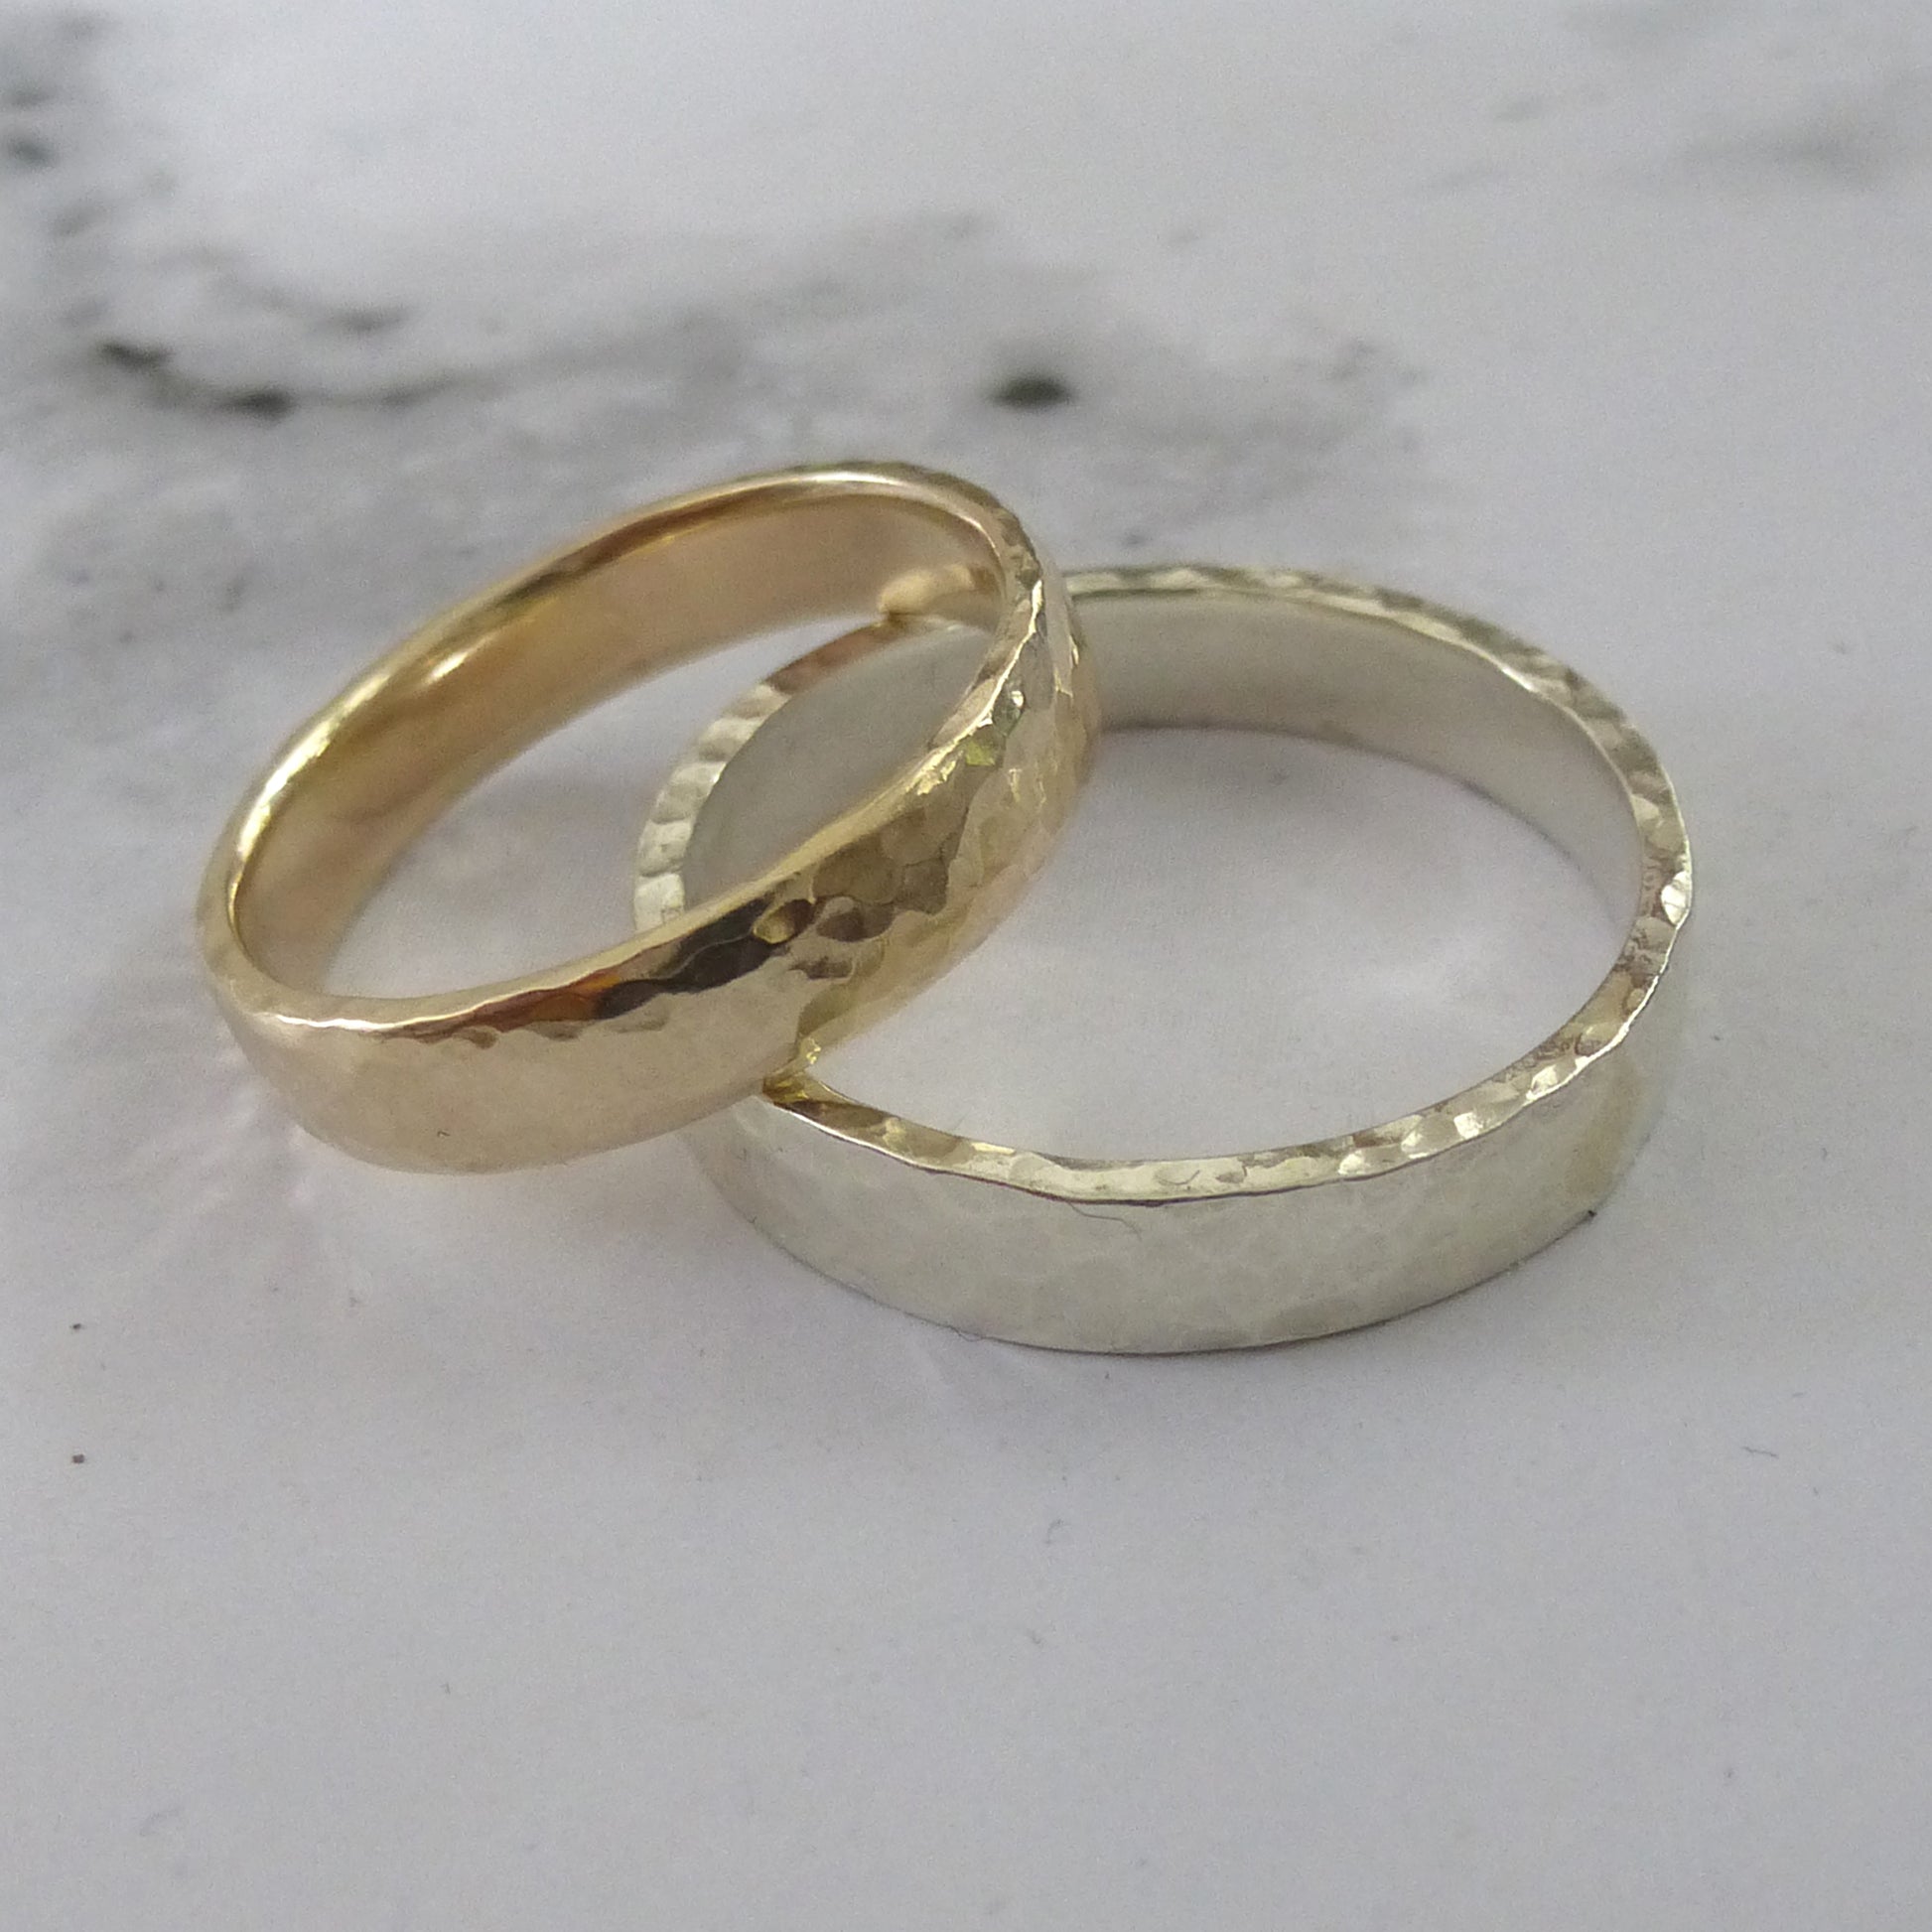 A pair of hammered wedding rings, 4mm, recycled gold. Top band in yellow with soft edges, lower band 9ct white gold, square edges